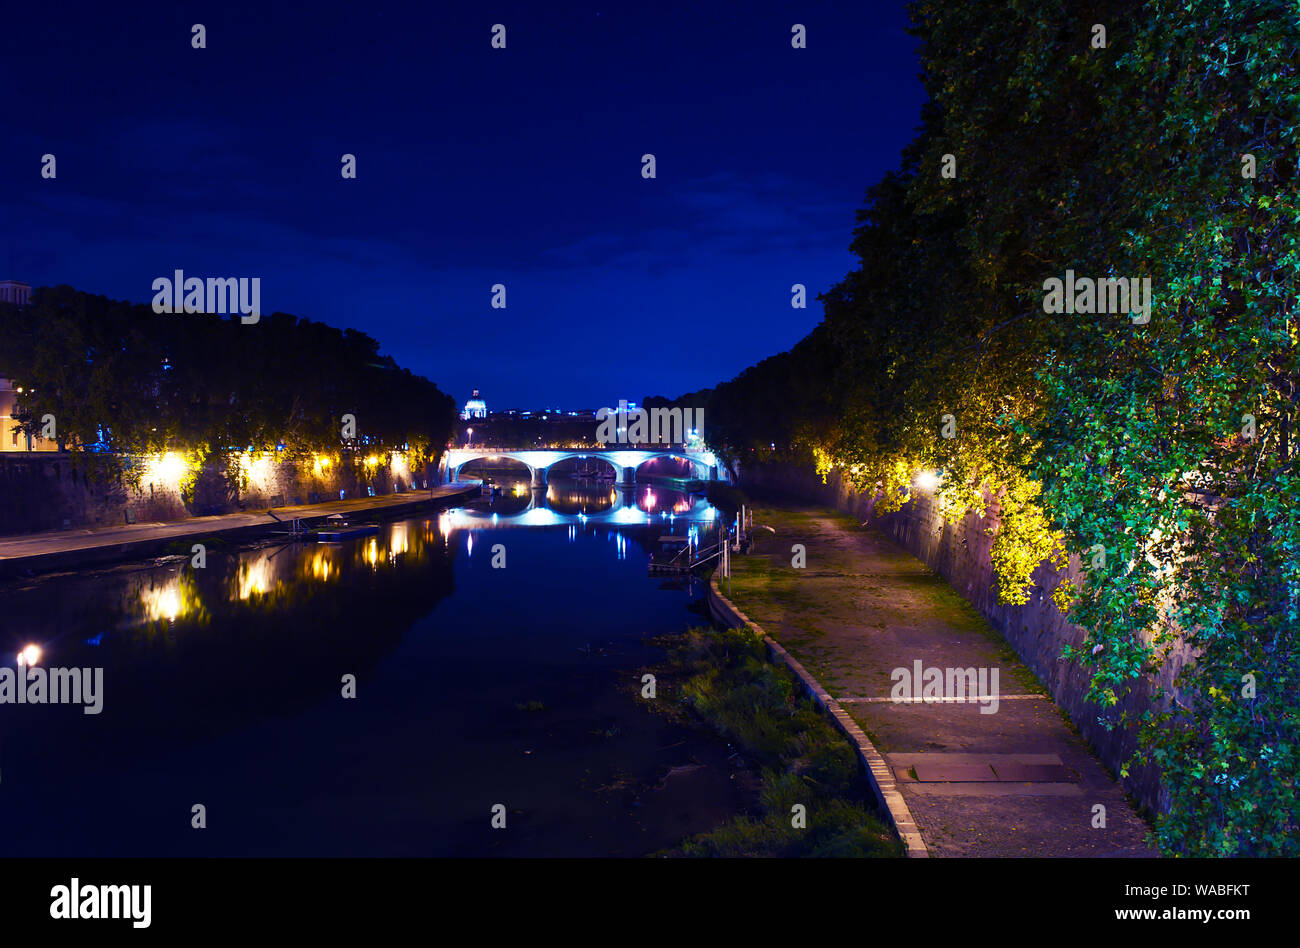 Image of Rione Ponte district. View of white Ponte Umberto I bridge and its reflection, orange trees, waters of Tiber river under dark blue night autu Stock Photo